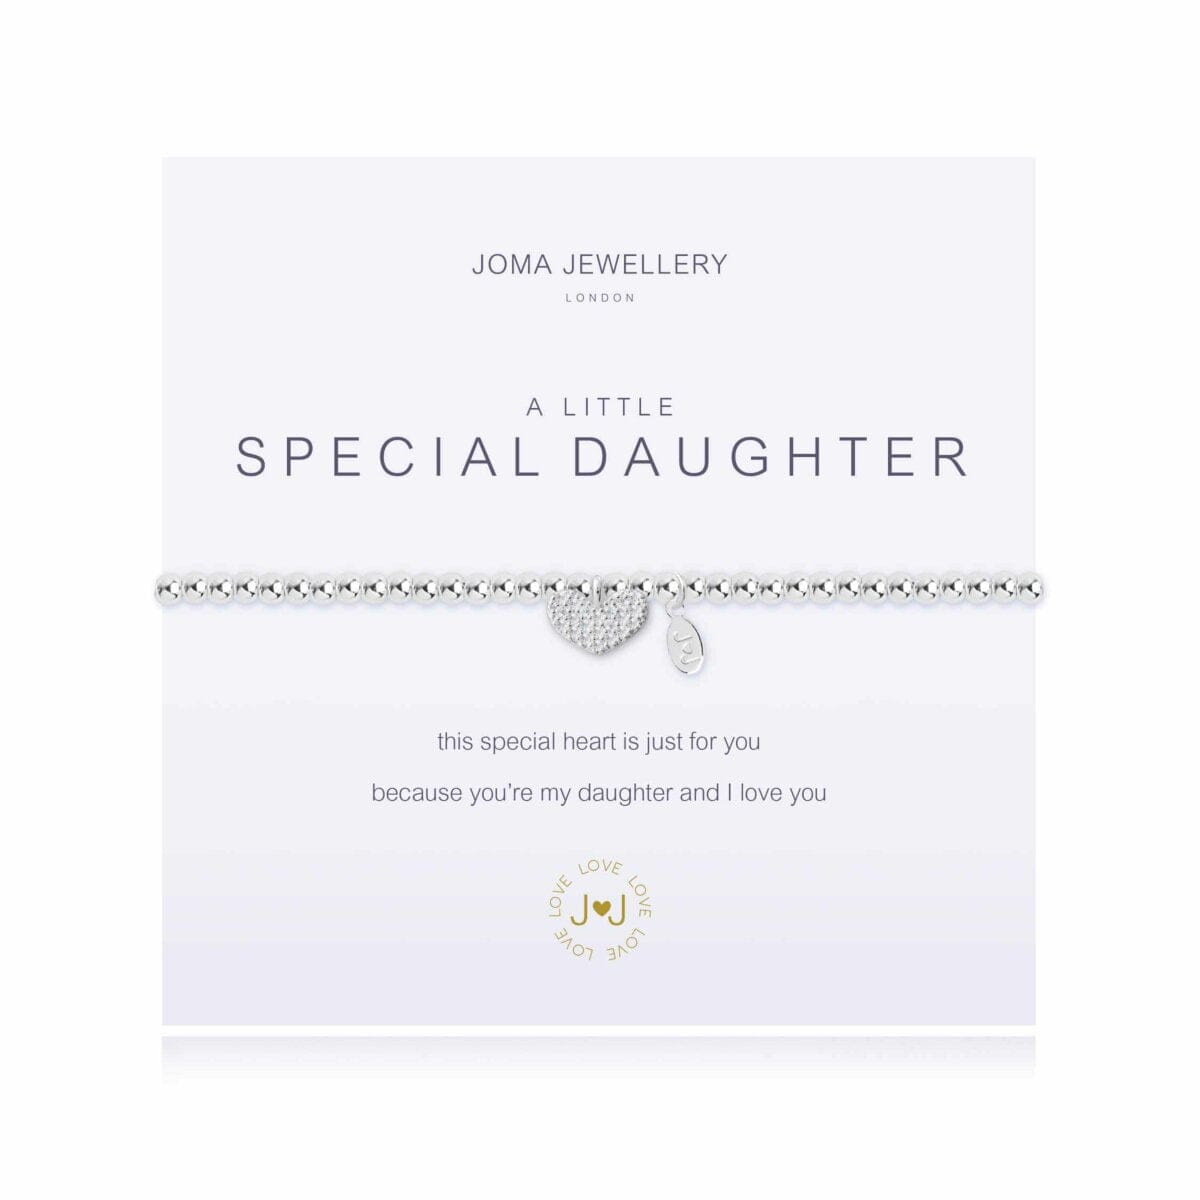 Joma Jewellery Bracelet Joma Jewellery Bracelet - a Little Special Daughter